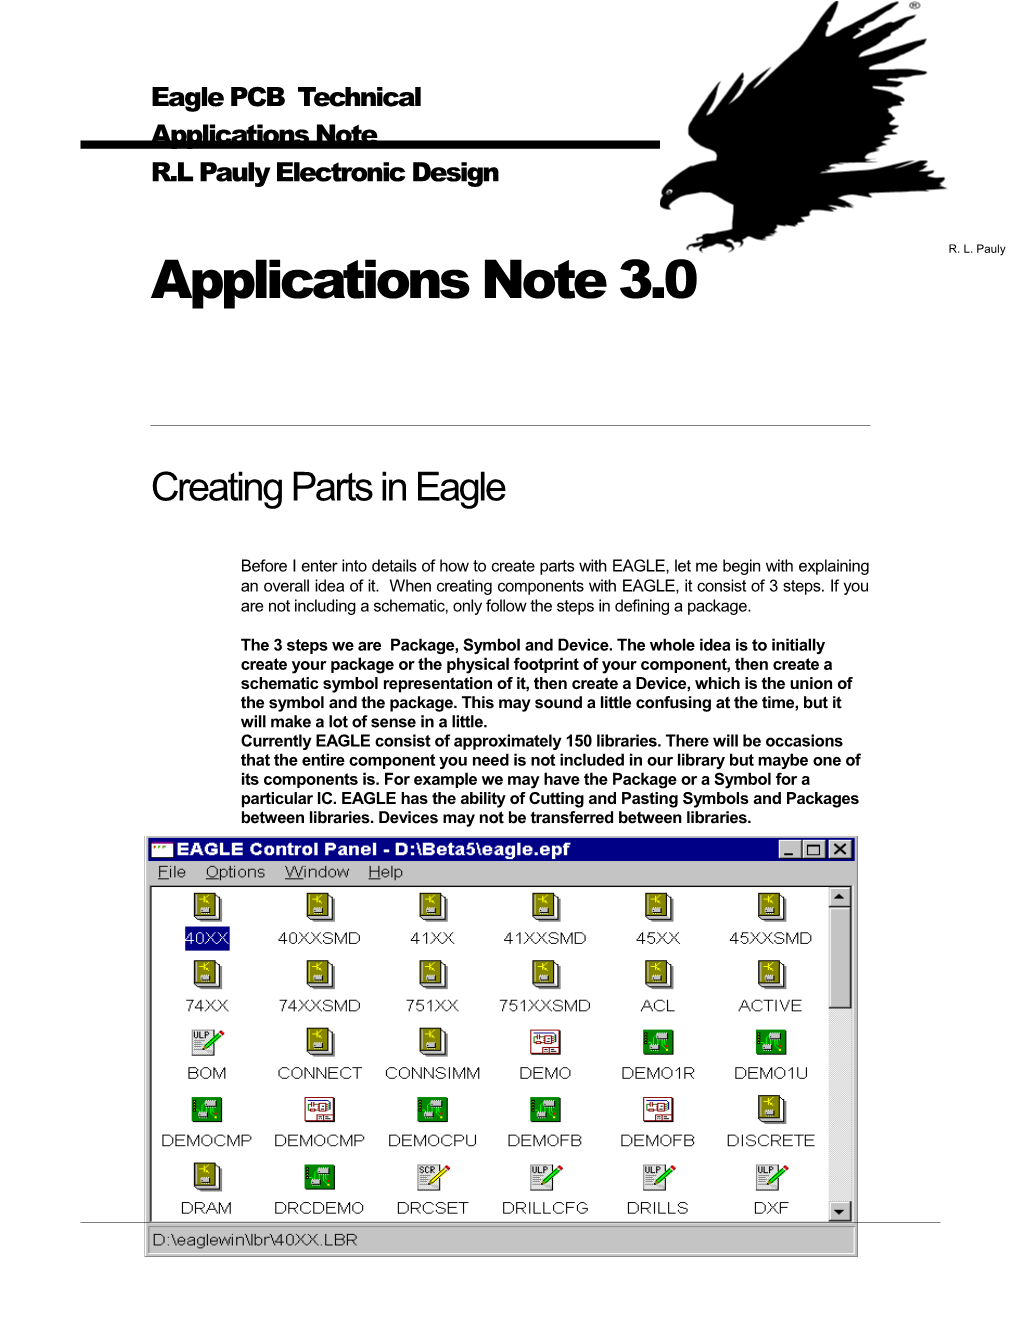 Eagle PCB Technical Applications Note